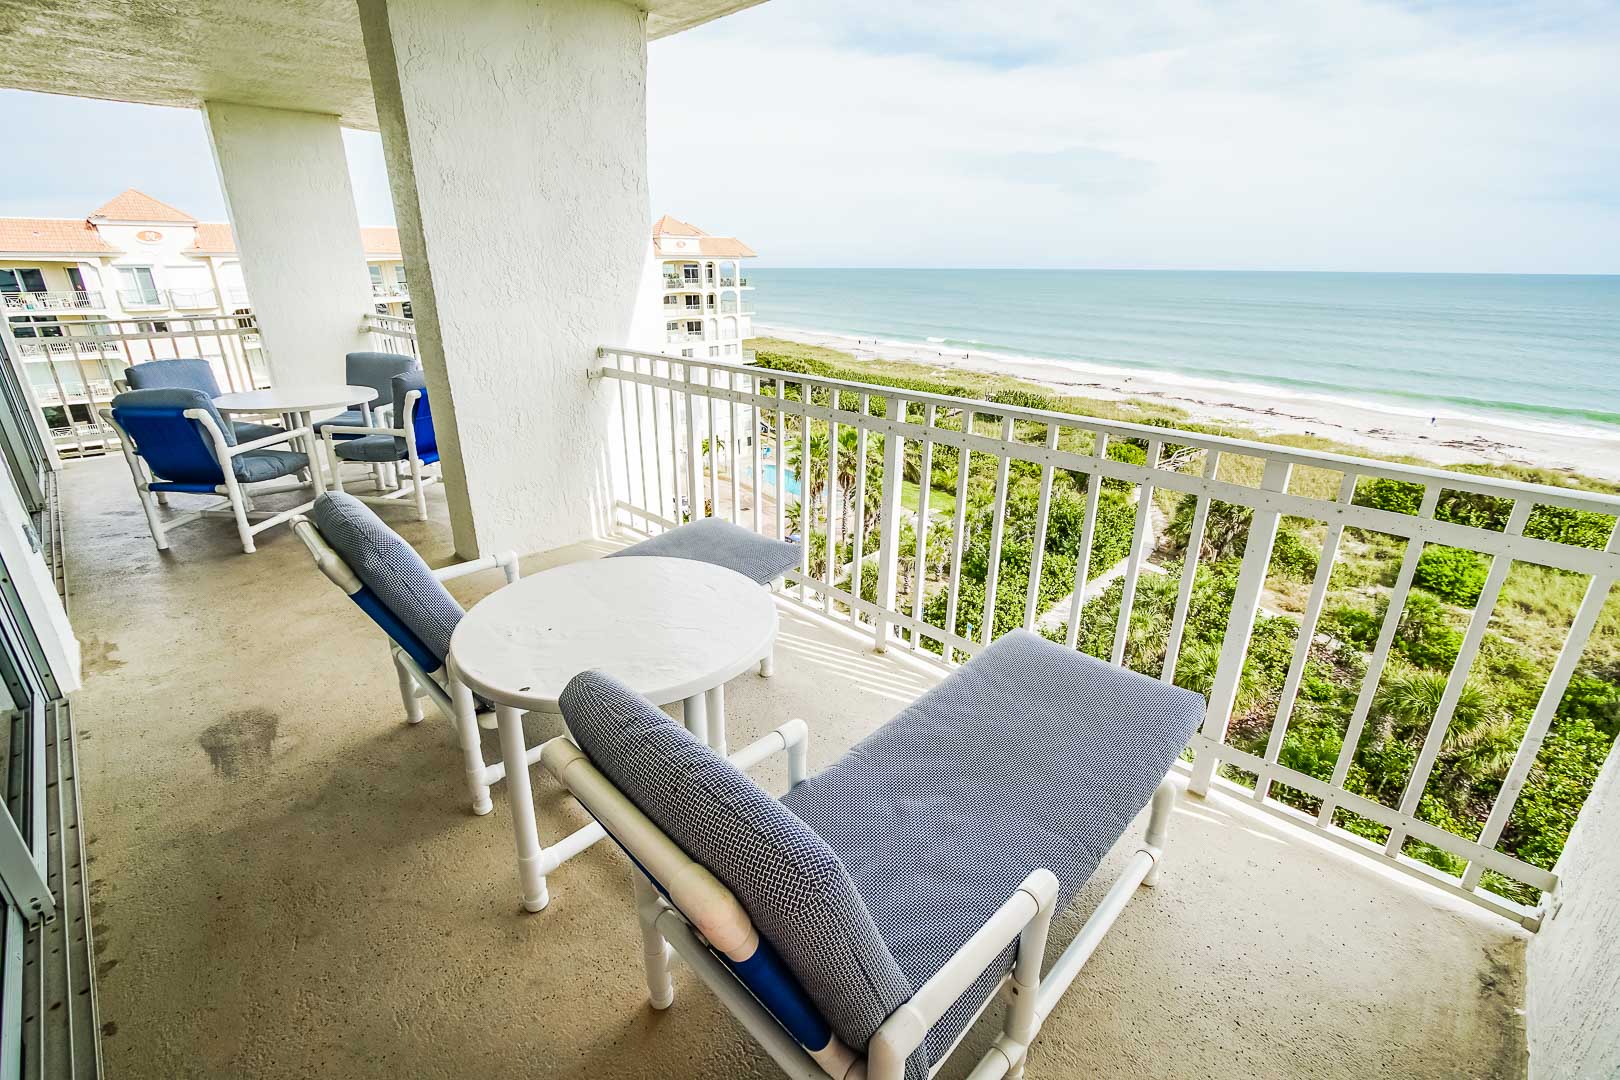 A balcony ocean front at VRI's Discovery Beach Resort in Cocoa Beach, Florida.